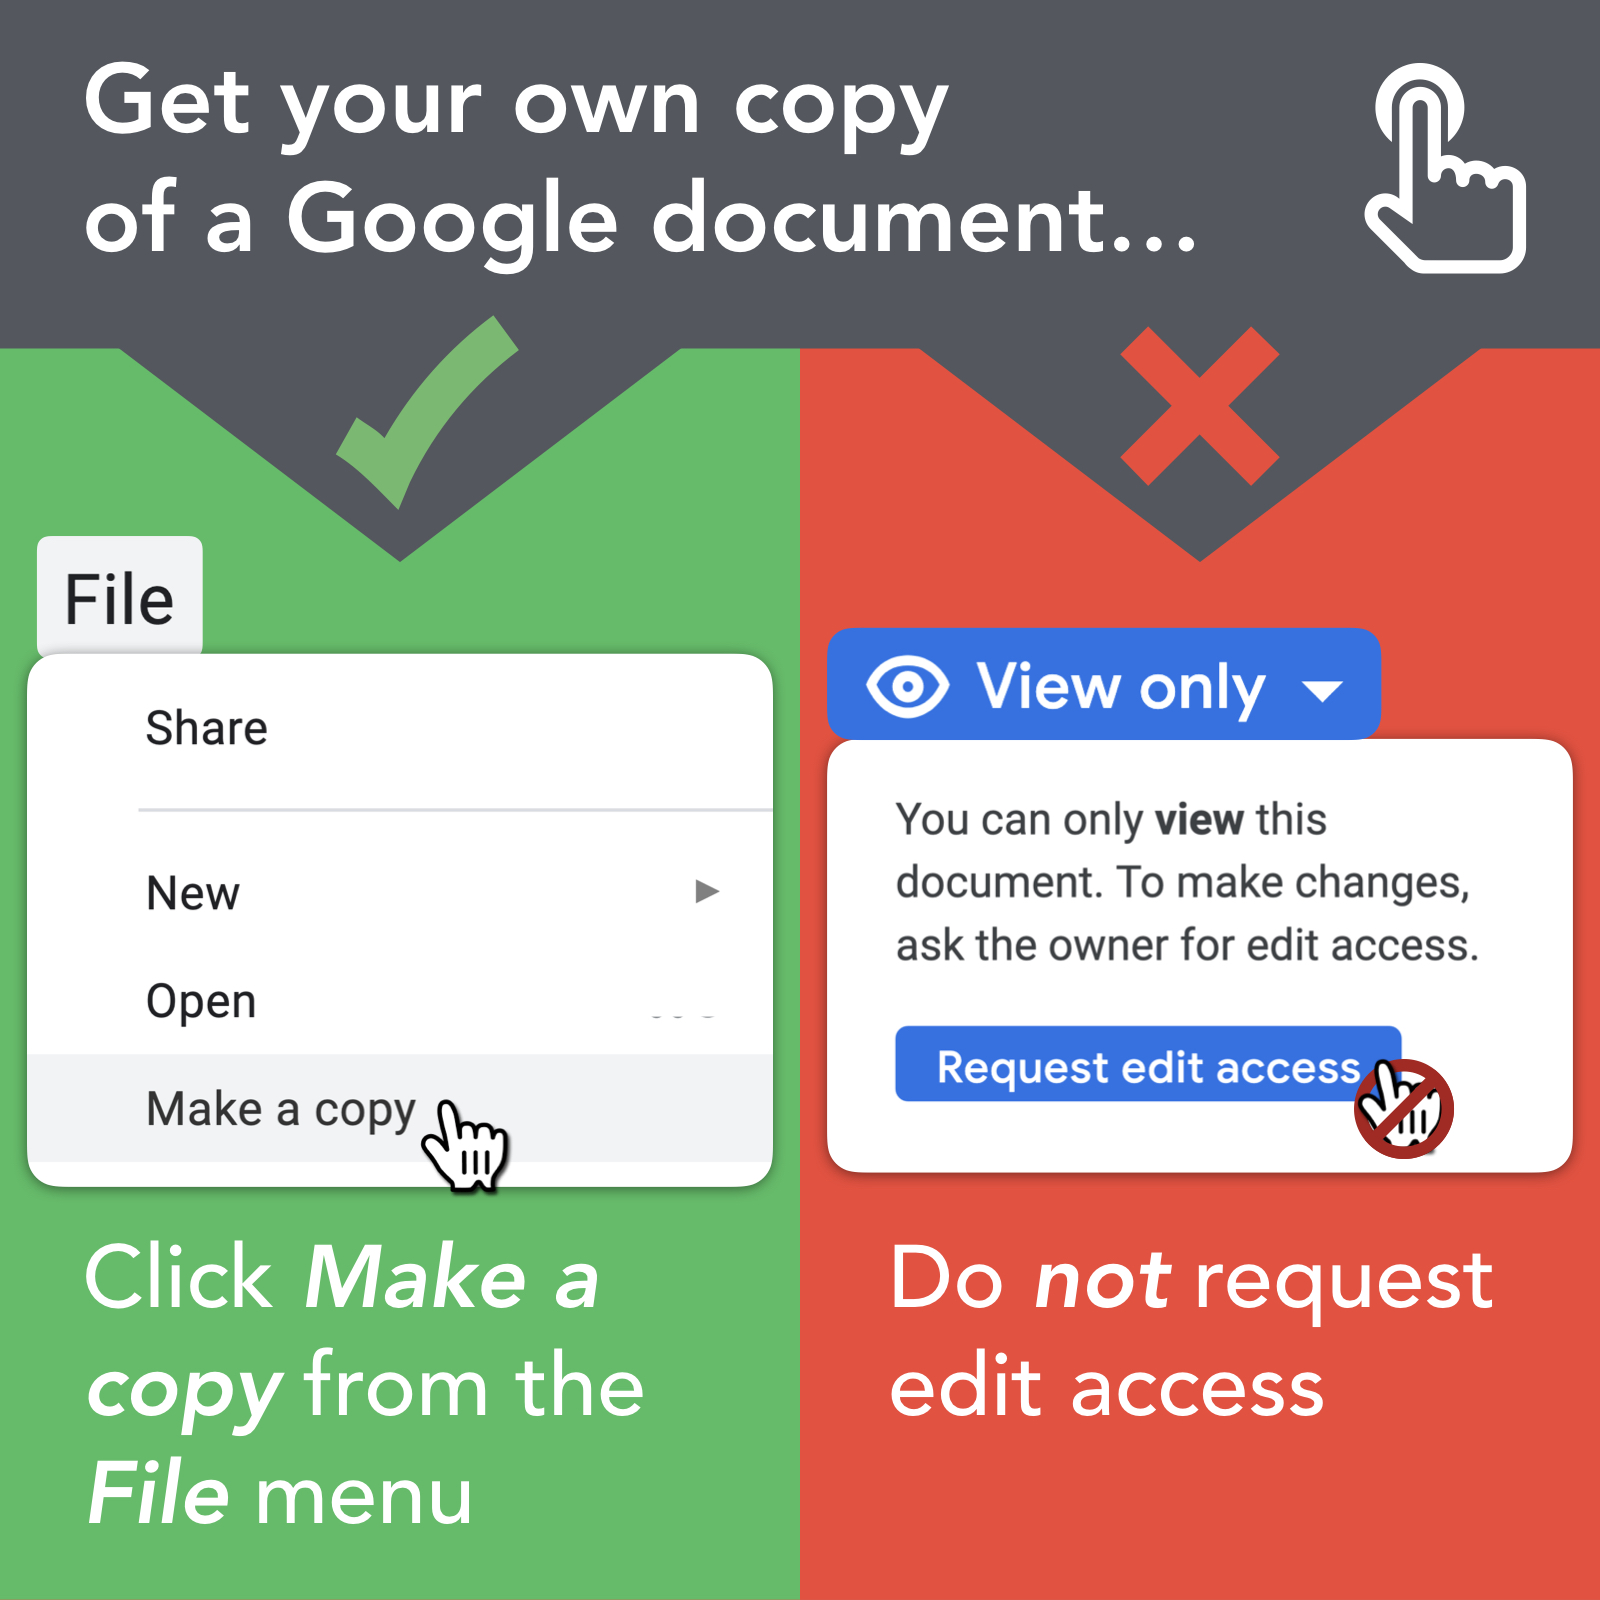 Get your own copy of a Google Document with File > Make a copy